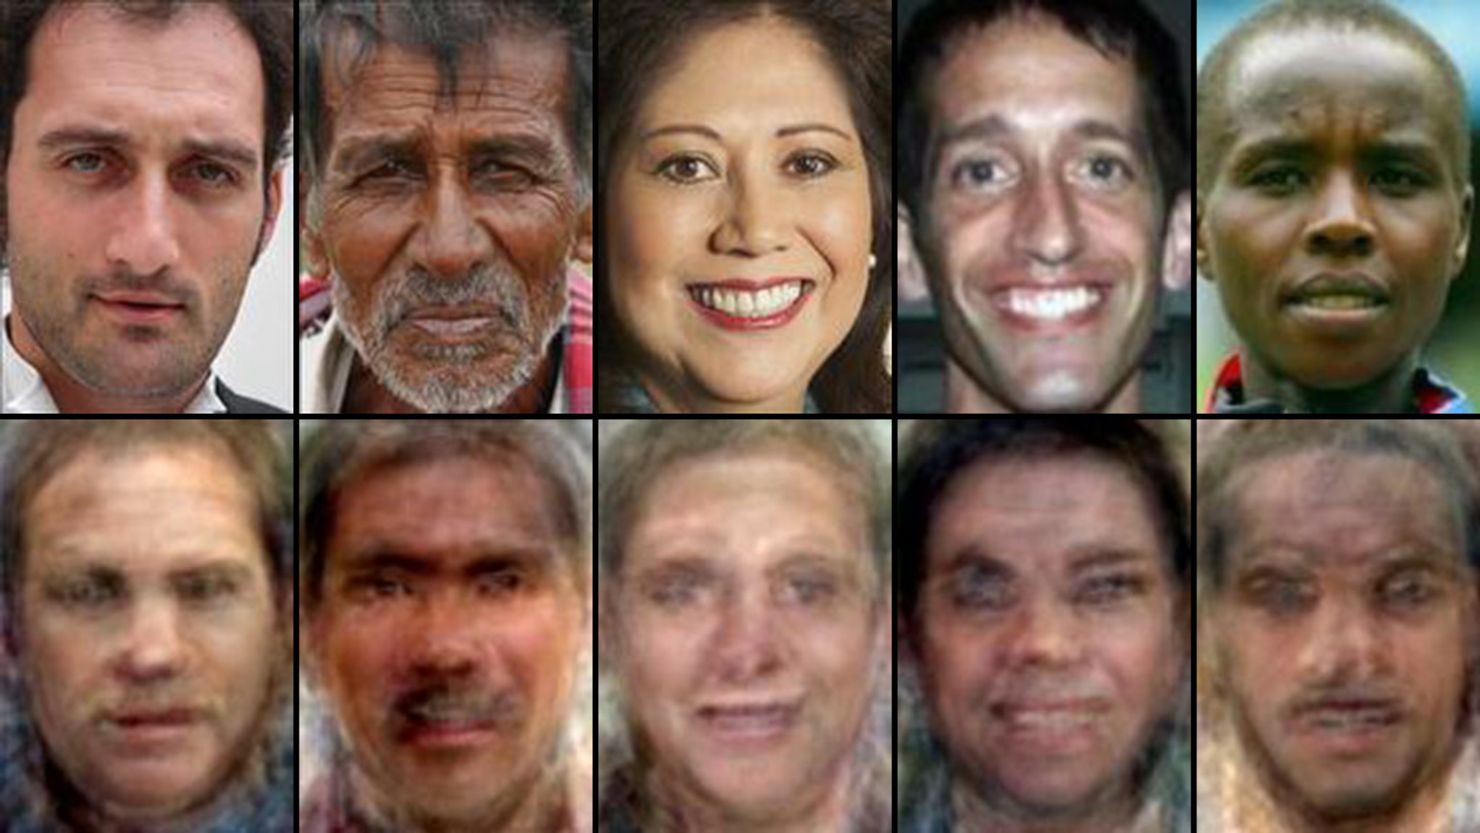 Top row: Images of faces. Bottom row: Reconstructed images based on brain activity, as shown by Alan Cowen and colleagues.